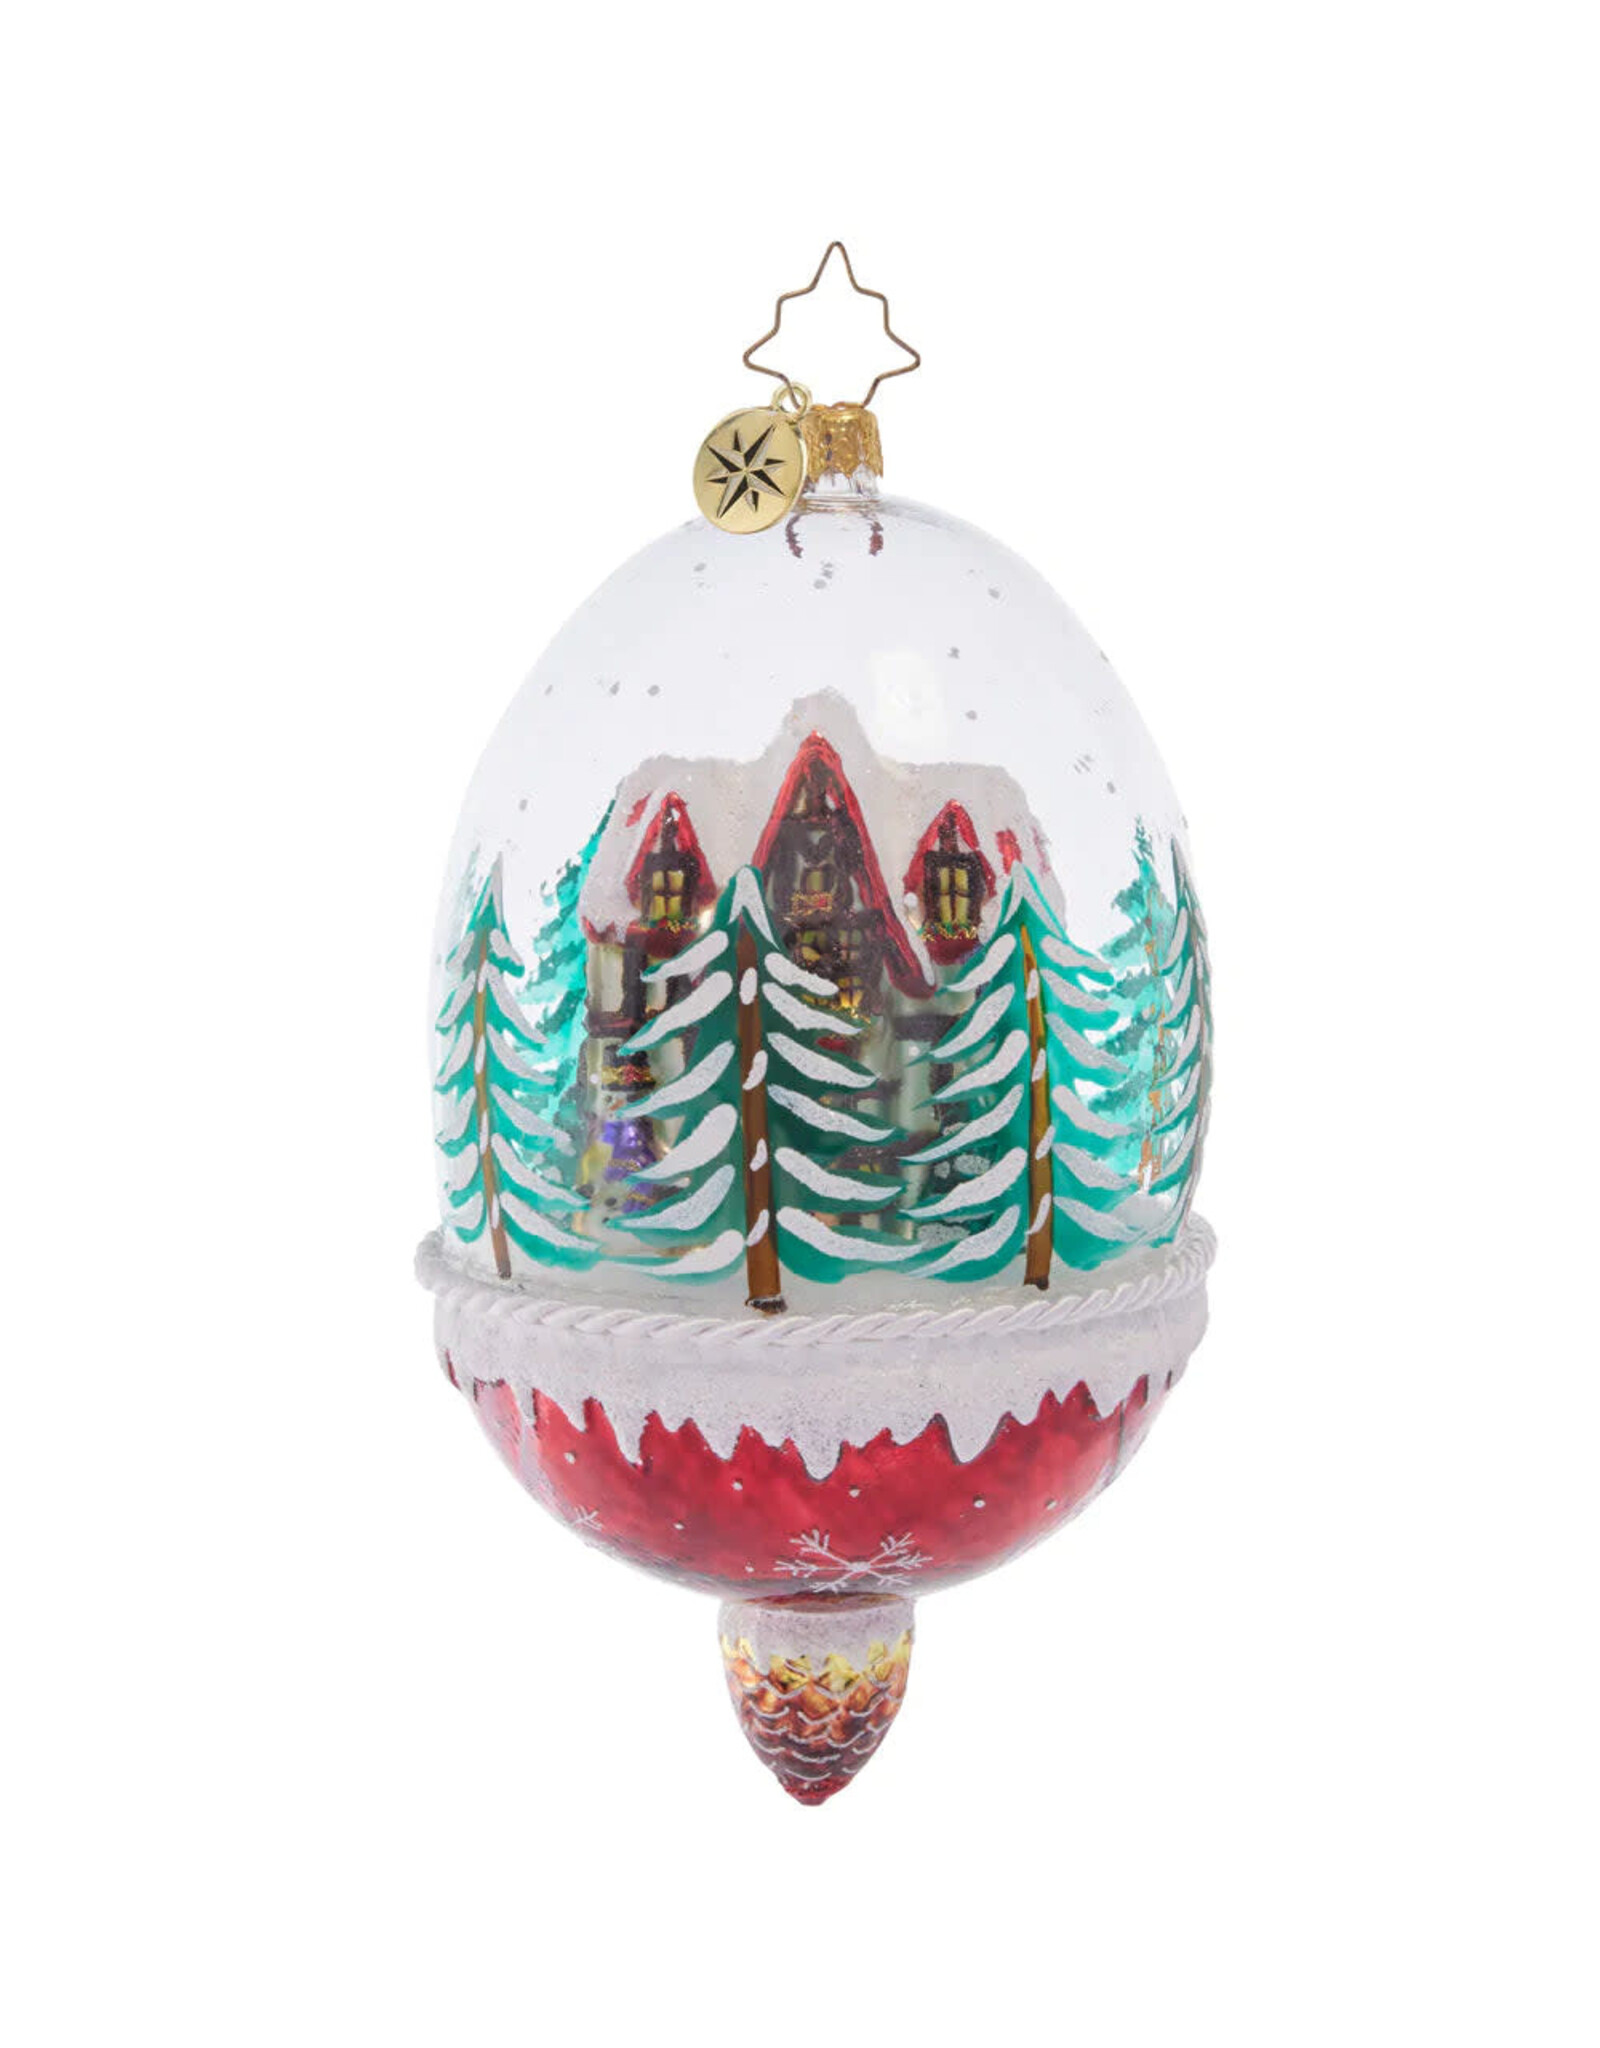 Christopher Radko Winter Cottage Hideaway Ornament Limited Edition